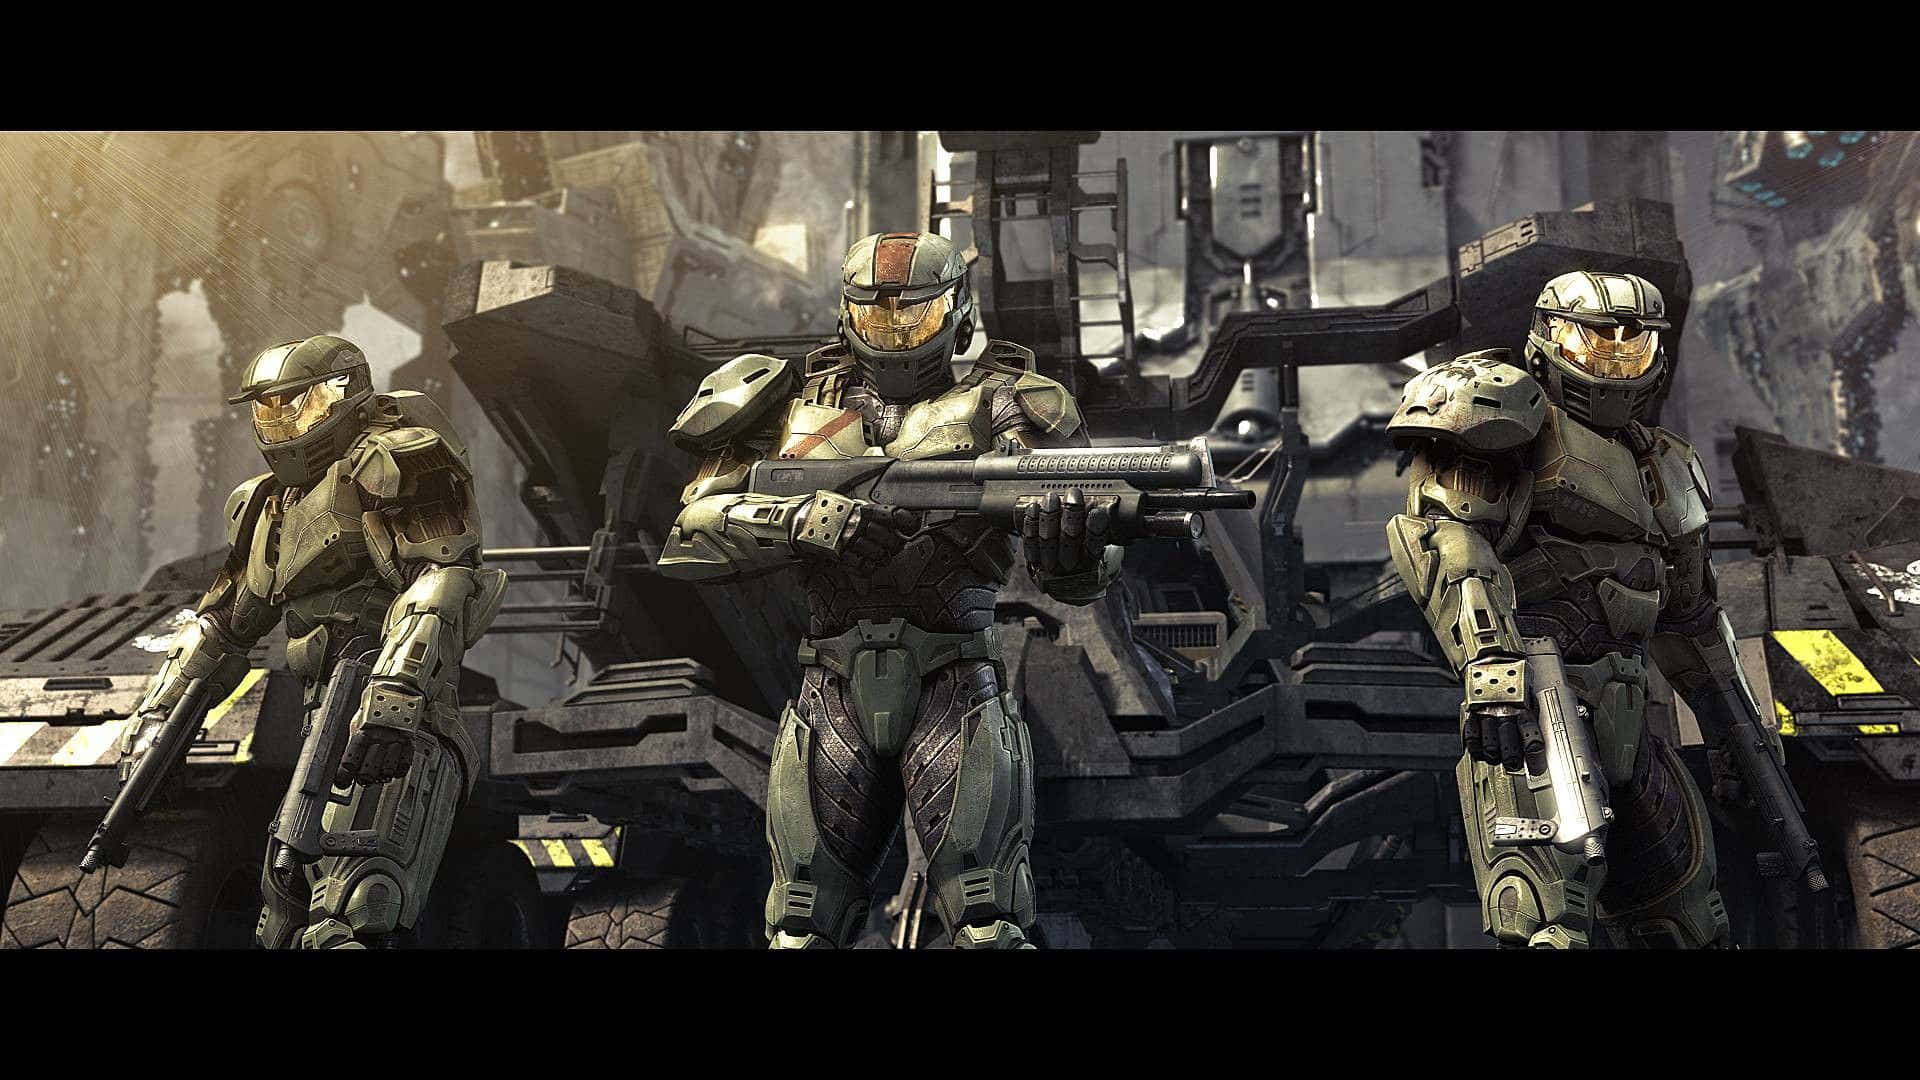 Intense Combat in the Halo Universe Wallpaper